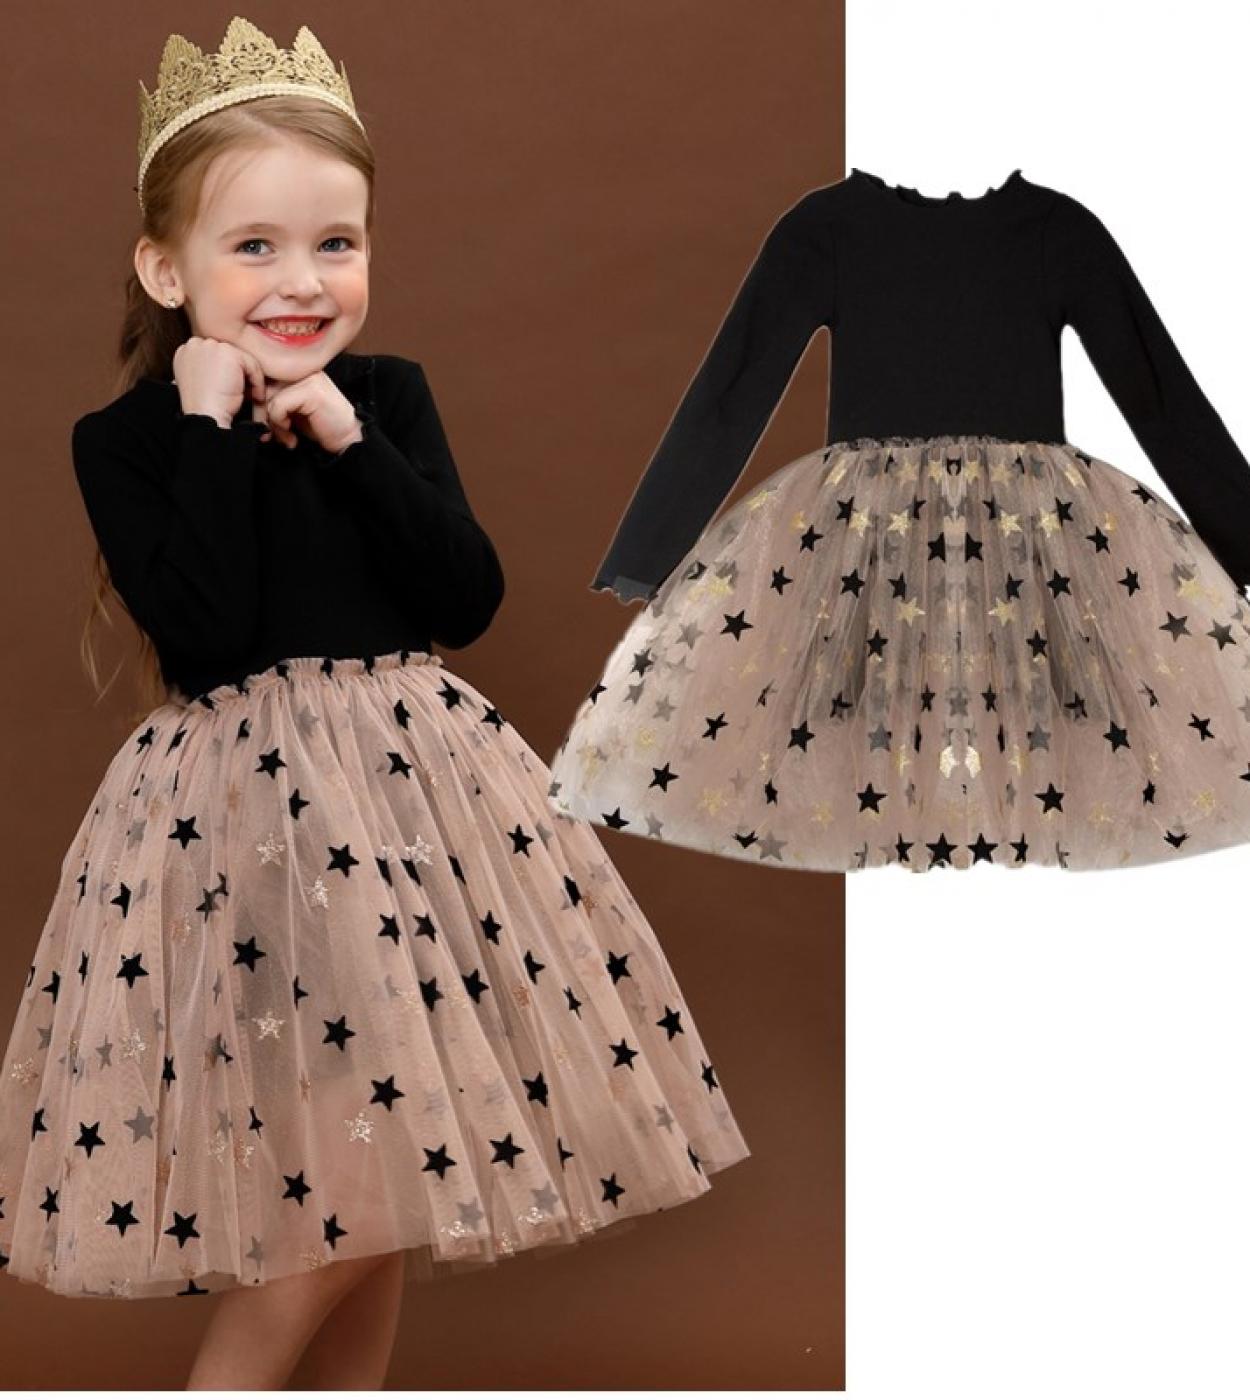  Brand Lace Polka Dotted Dress For Girls Mesh Princess Birthday Party Dress Elegant Prom Gown 38y Kids Childrens Dresse